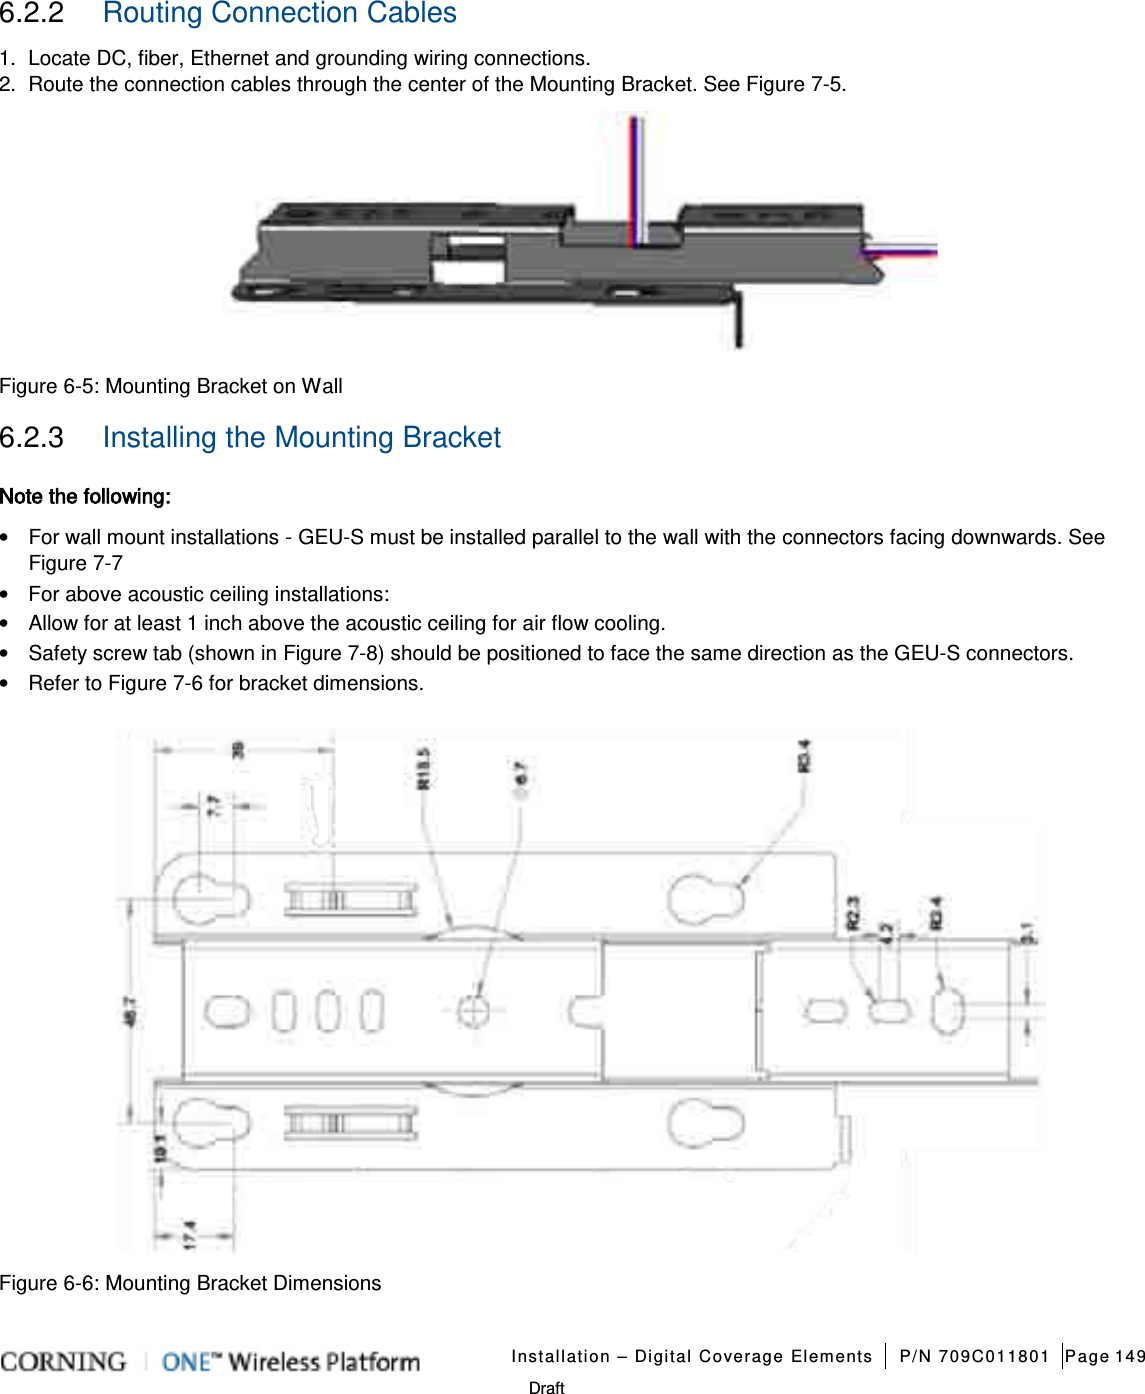   Installation – Digital Coverage Elements P/N 709C011801 Page 149   Draft 6.2.2  Routing Connection Cables 1.  Locate DC, fiber, Ethernet and grounding wiring connections. 2.  Route the connection cables through the center of the Mounting Bracket. See Figure  7-5.      Figure  6-5: Mounting Bracket on Wall 6.2.3  Installing the Mounting Bracket Note the following:   • For wall mount installations - GEU-S must be installed parallel to the wall with the connectors facing downwards. See Figure  7-7   • For above acoustic ceiling installations: • Allow for at least 1 inch above the acoustic ceiling for air flow cooling. • Safety screw tab (shown in Figure  7-8) should be positioned to face the same direction as the GEU-S connectors.   • Refer to Figure  7-6 for bracket dimensions.    Figure  6-6: Mounting Bracket Dimensions 